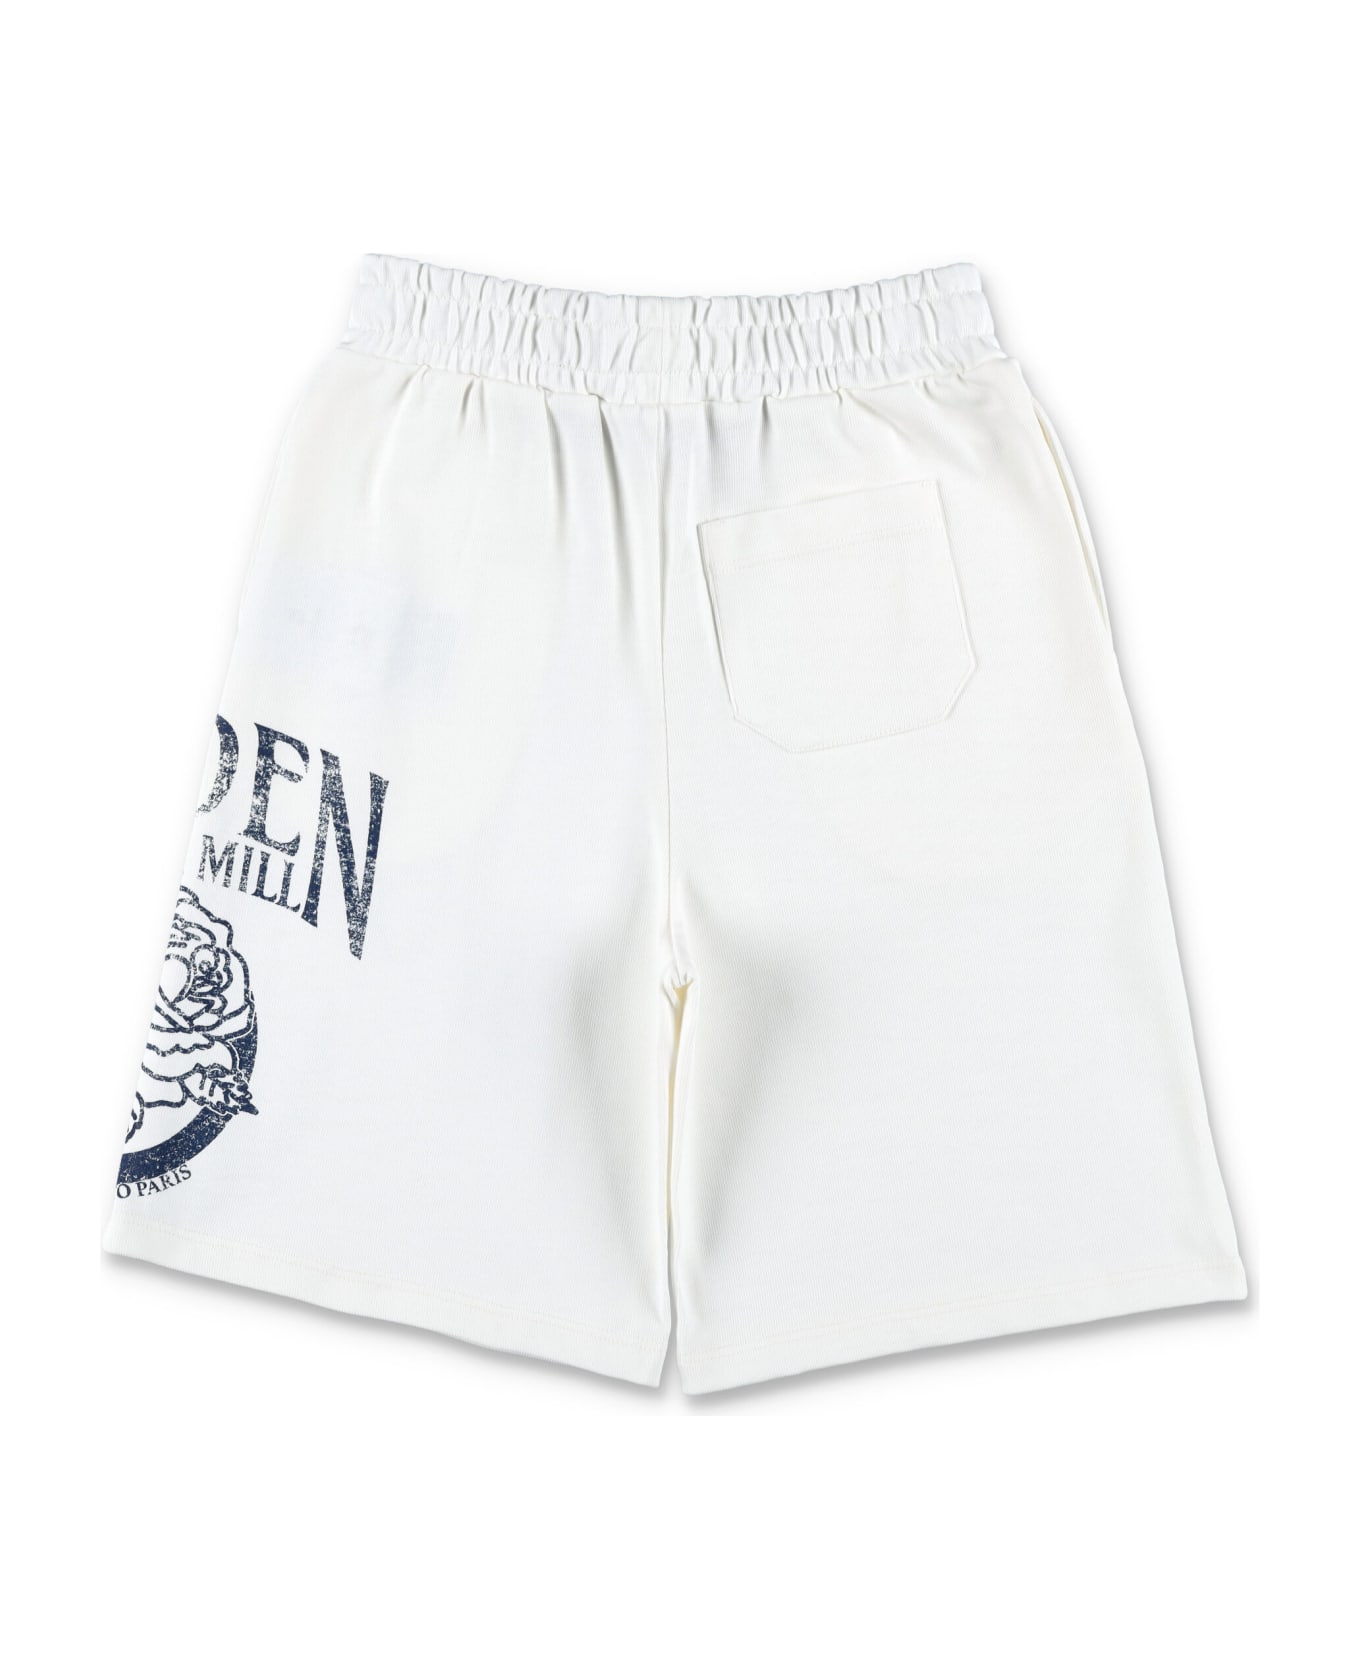 Golden Goose Printed Sweat-shorts - ARTIC WOLF/ECLIPSE ボトムス